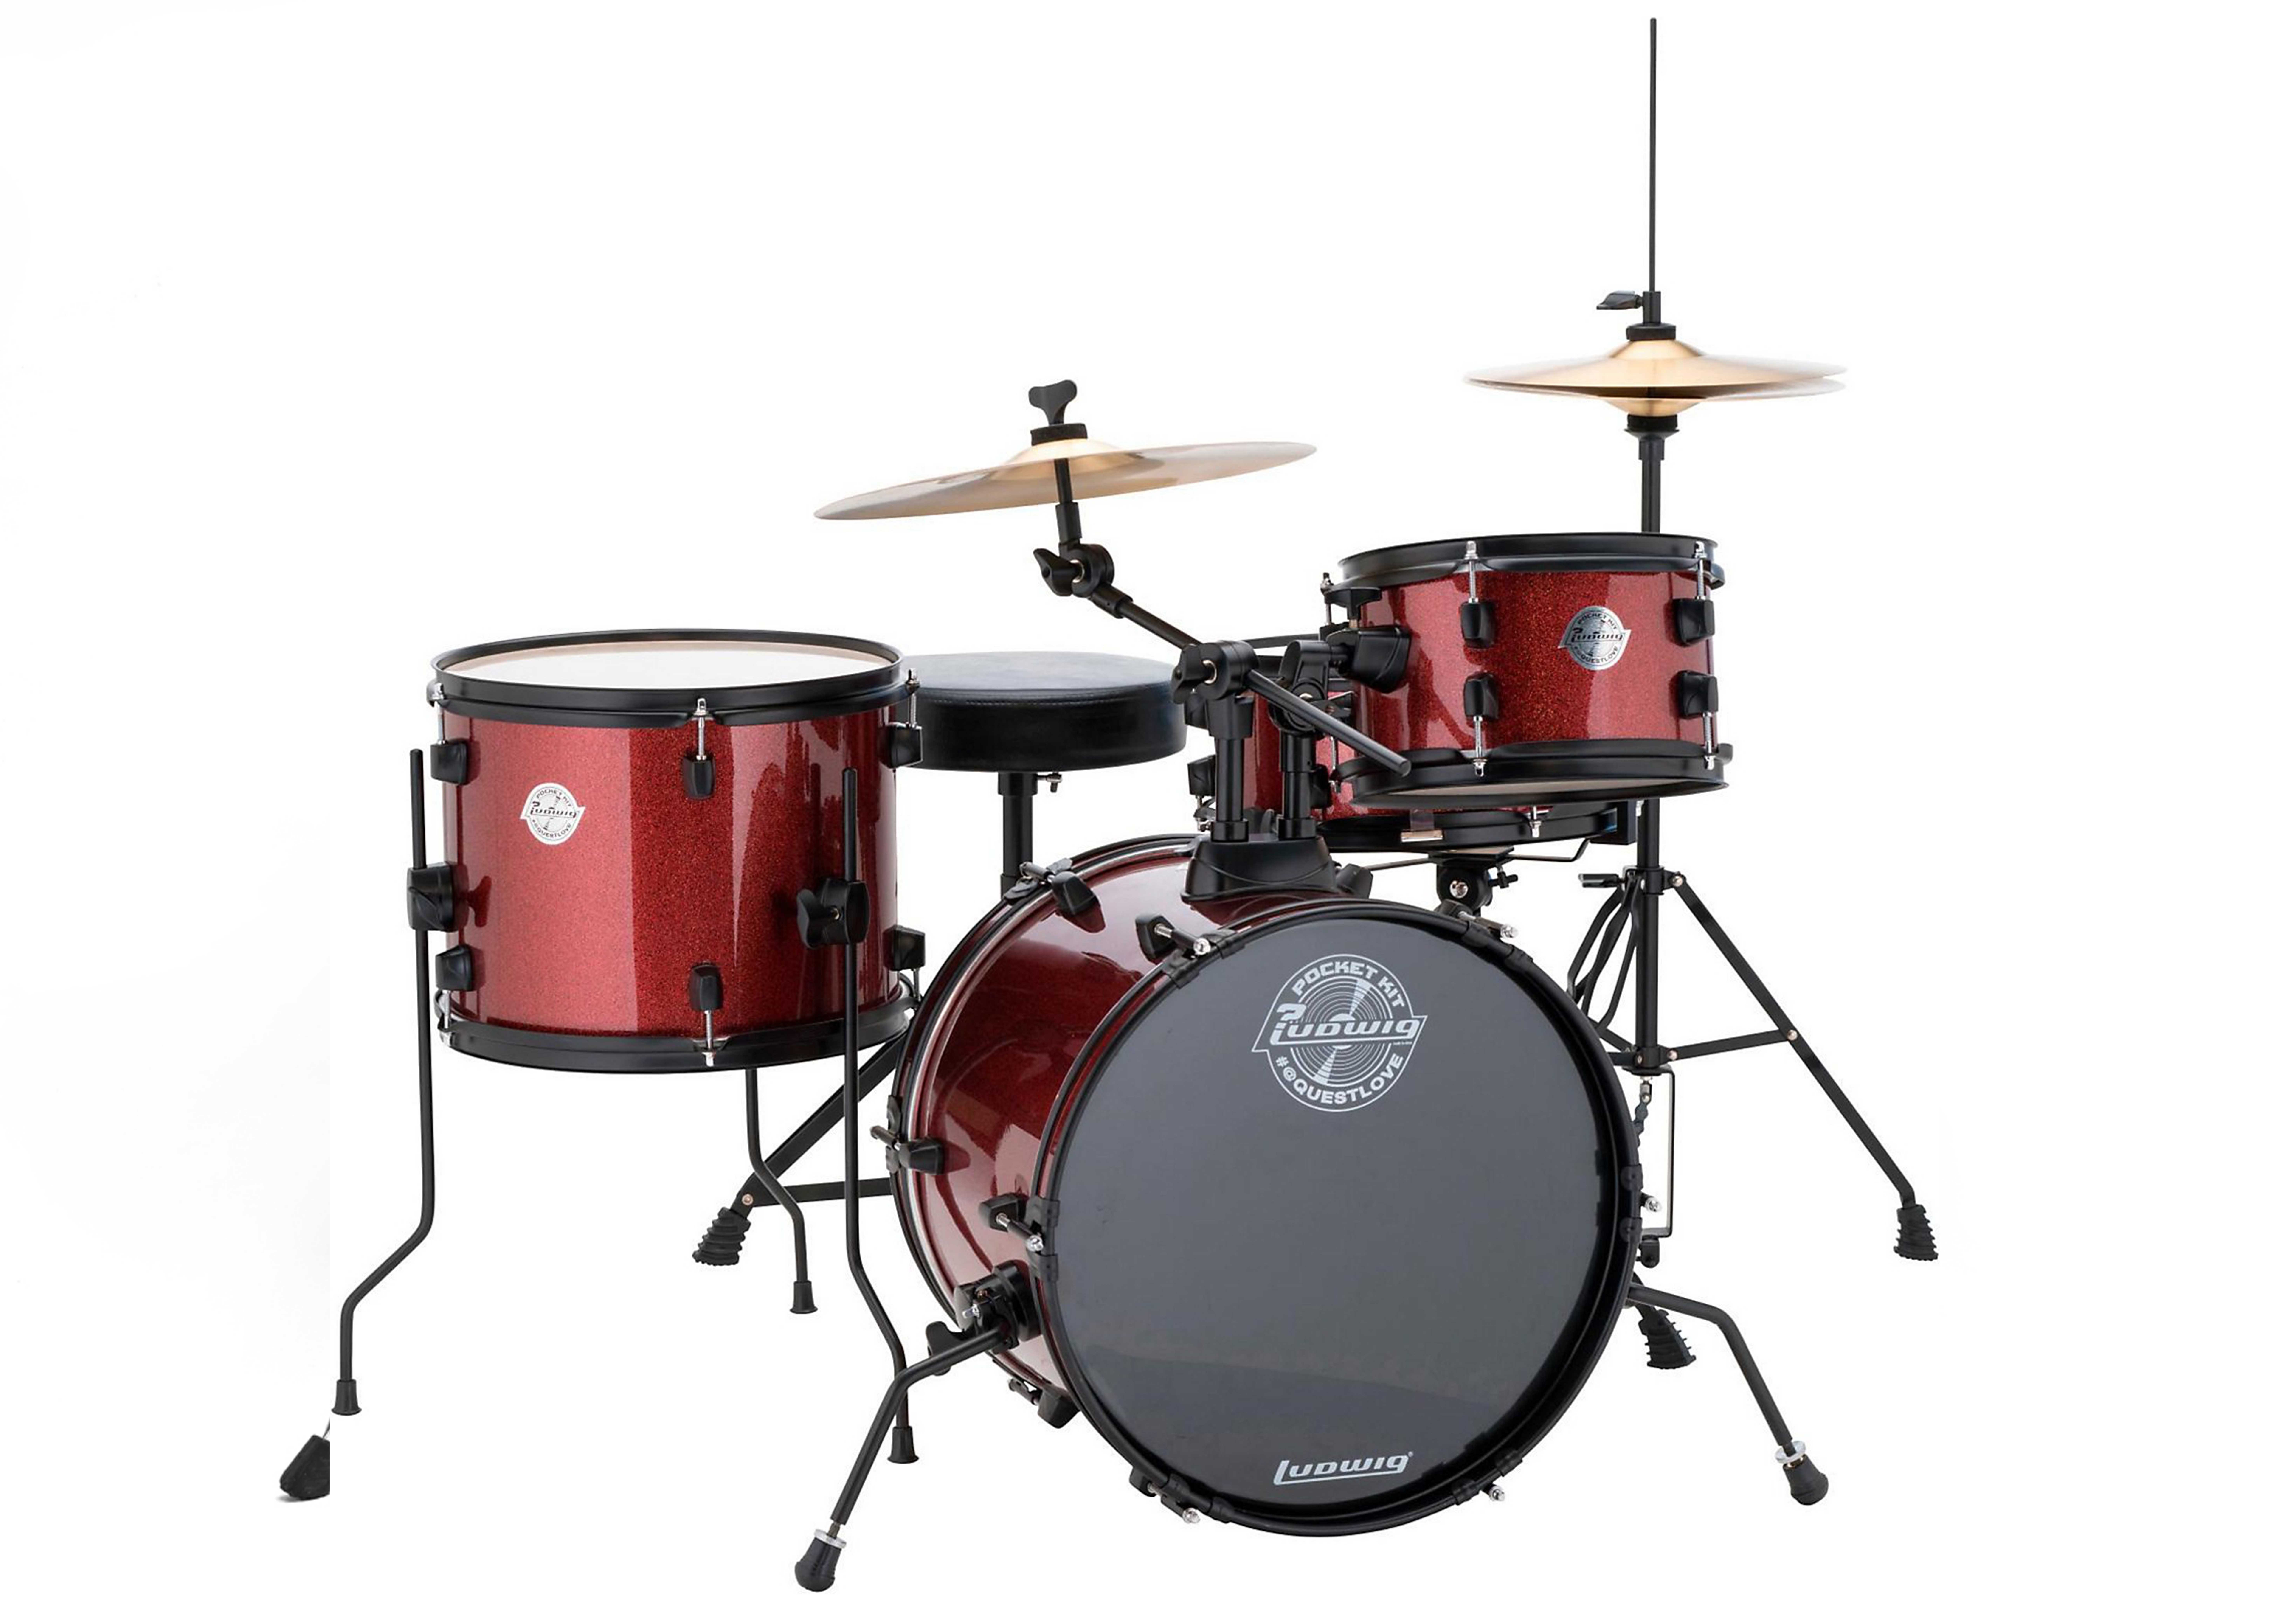 Buying Your First Drum Kit
